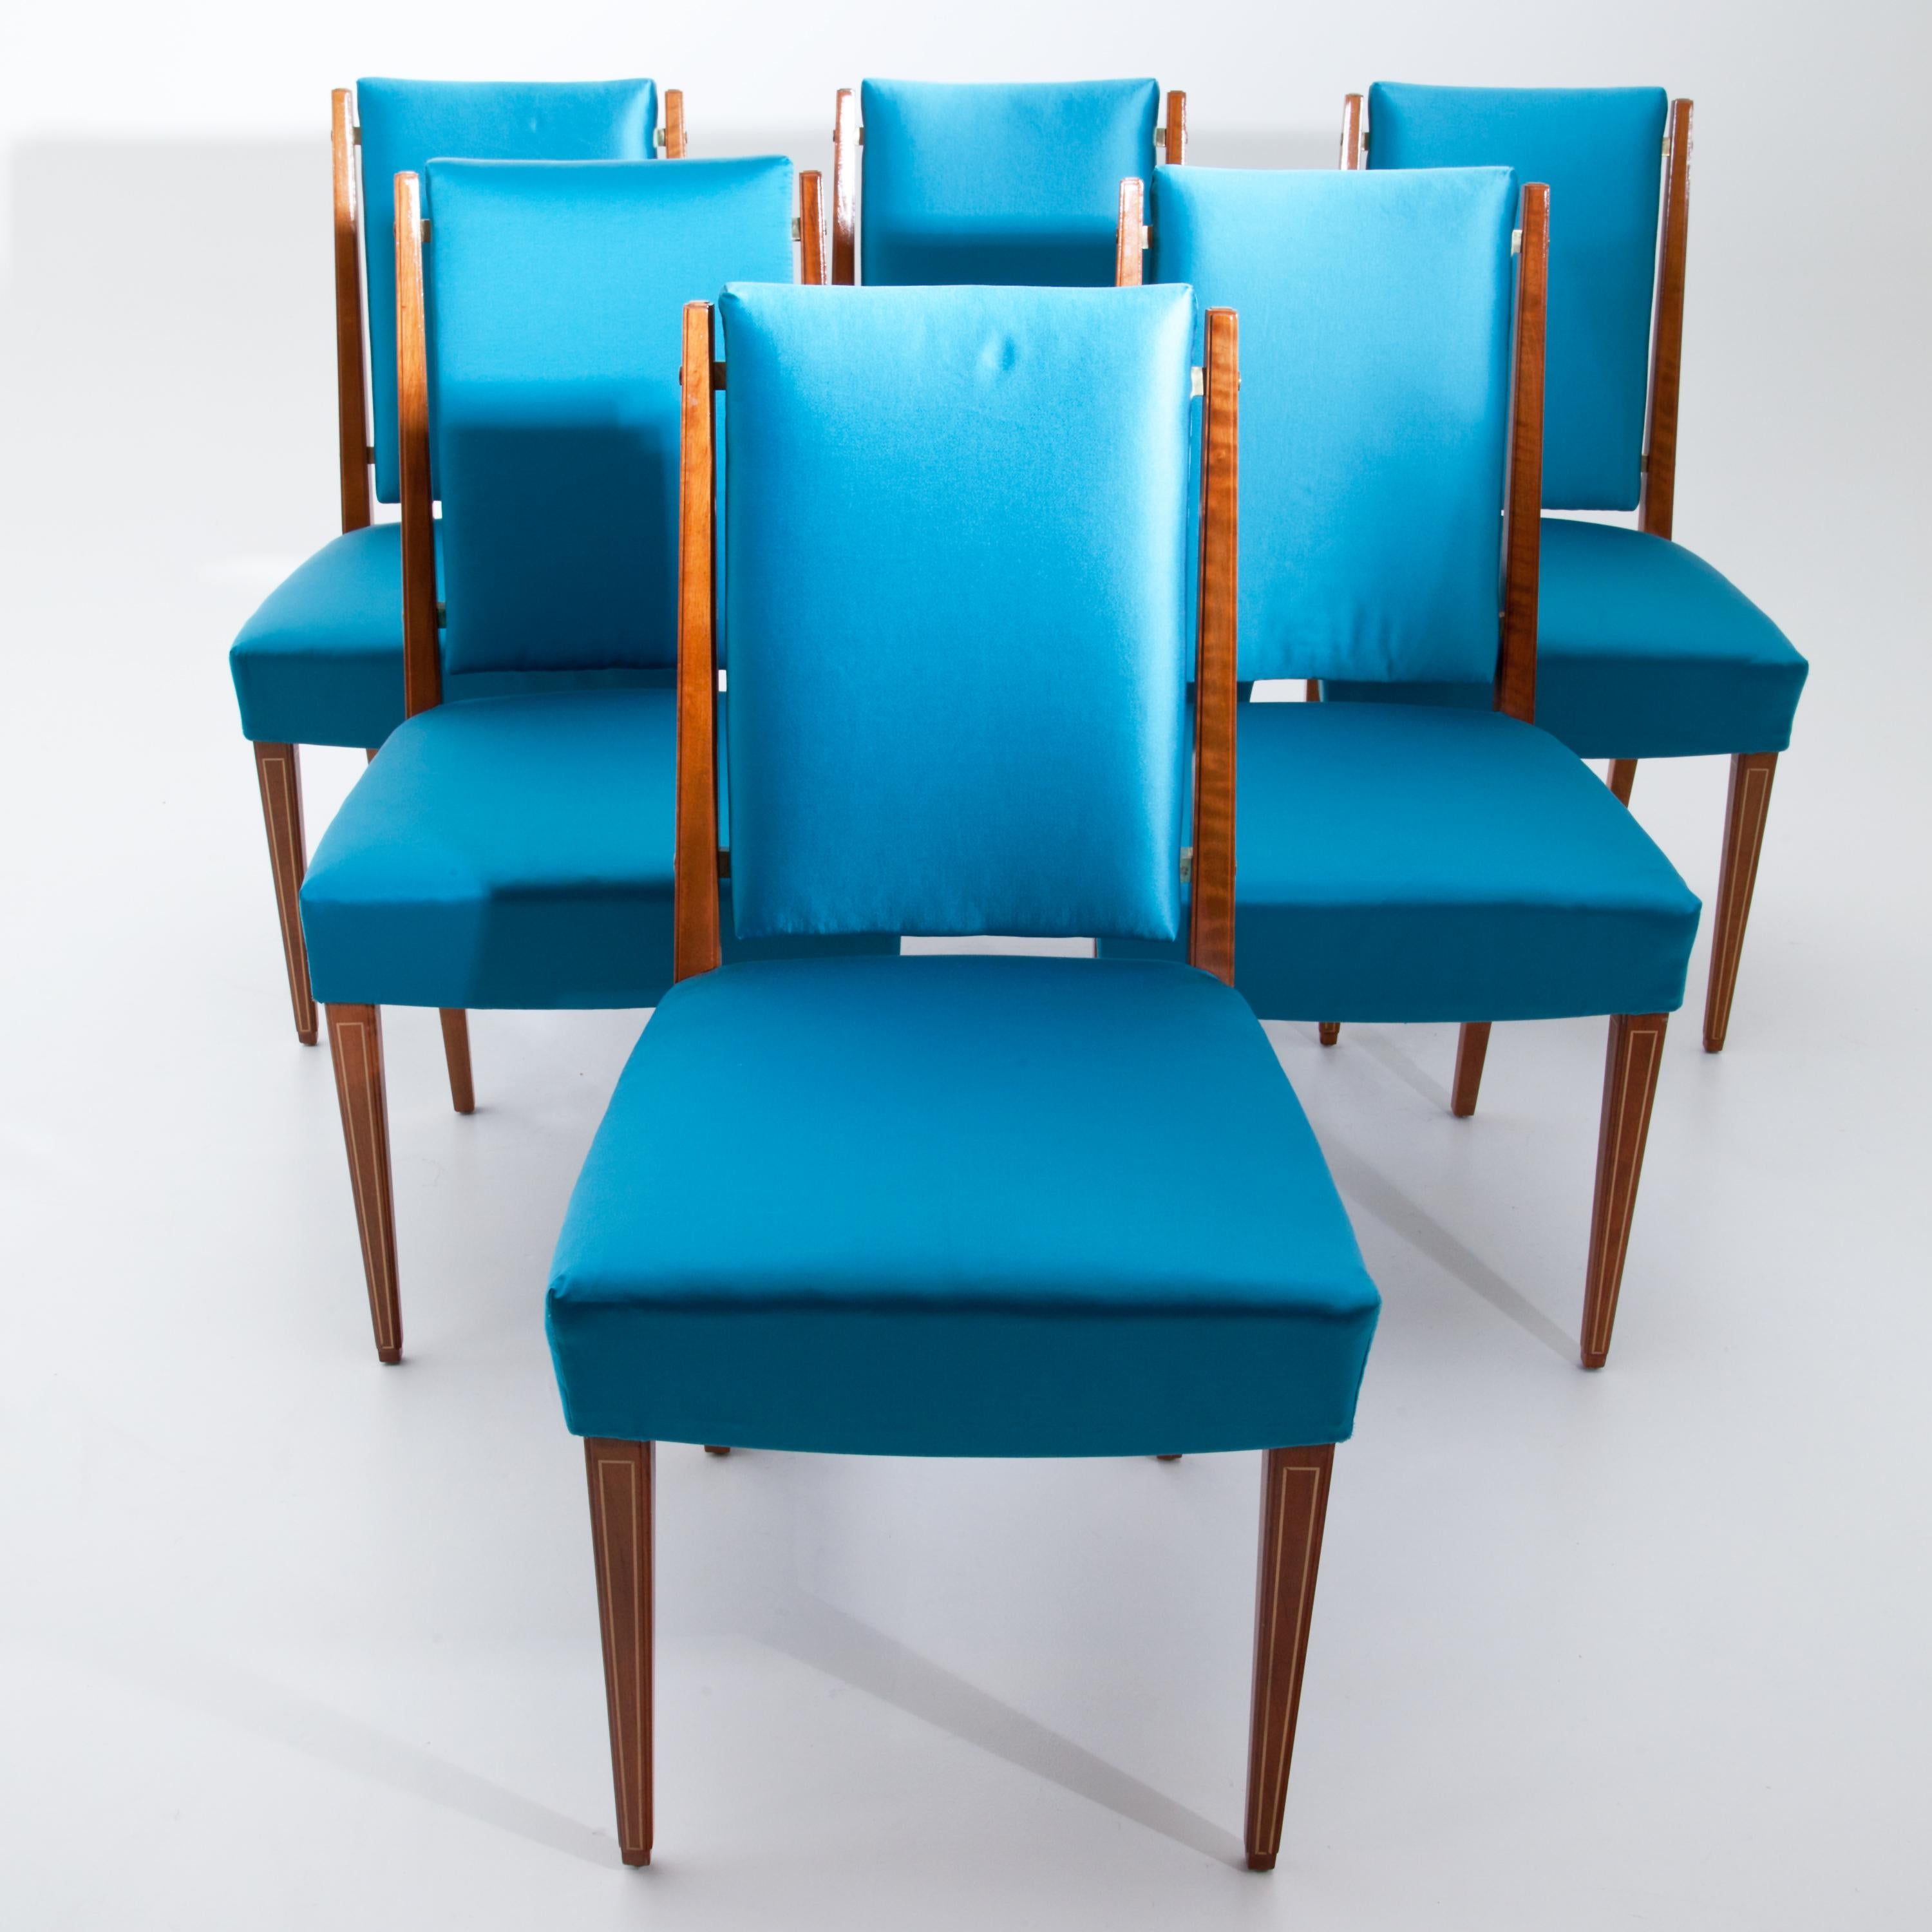 Wood Set of Eight Dining Room Chairs, France, Mid-20th Century